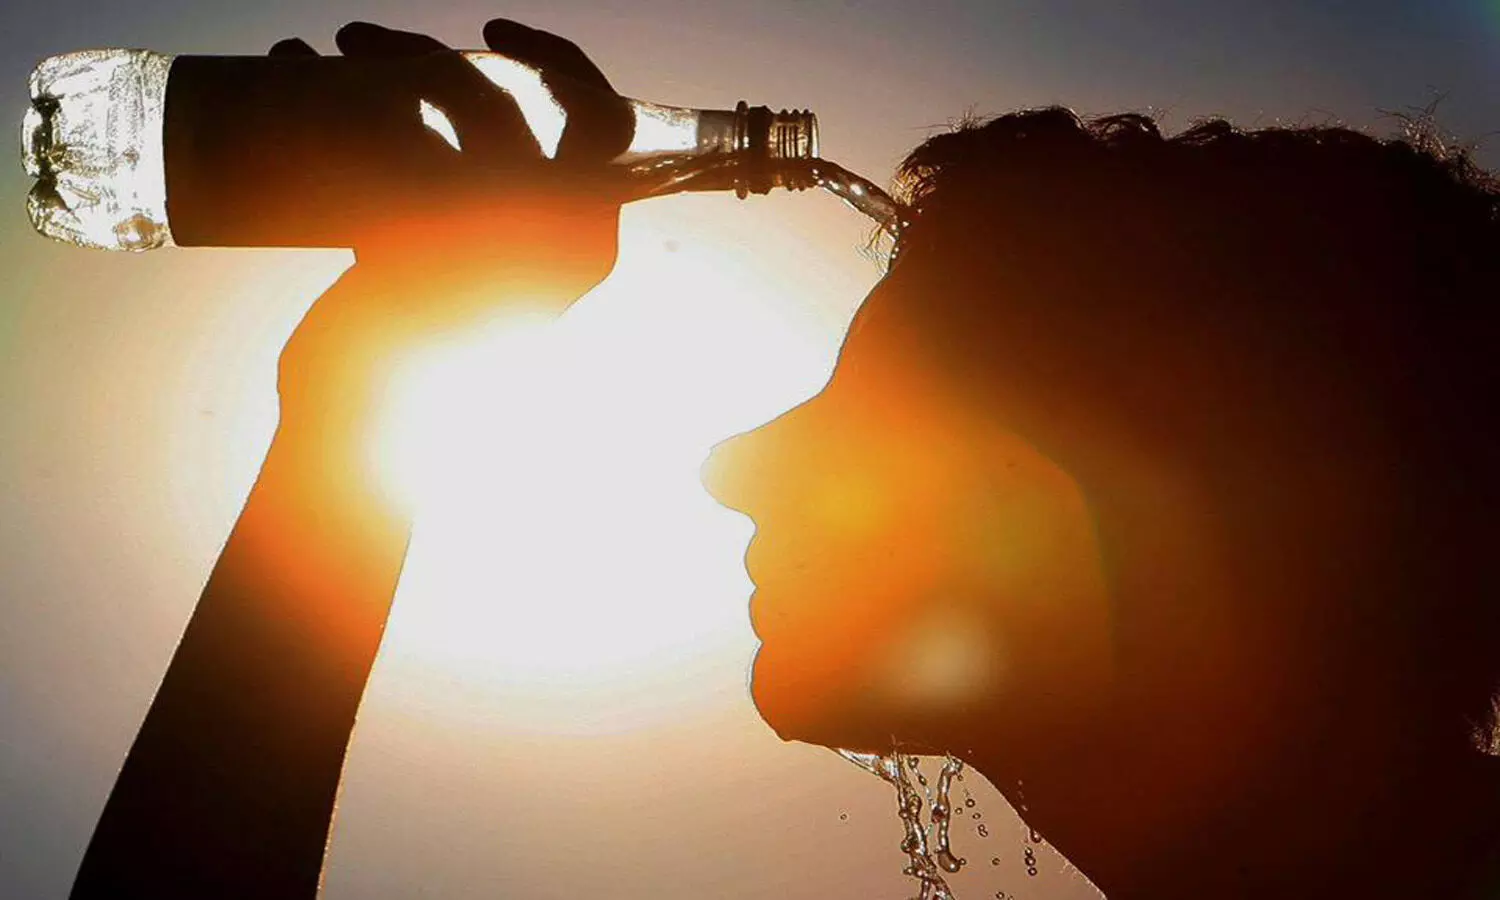 Scorching Summers: Why India Faces More Heatwaves (And What We Can Do)